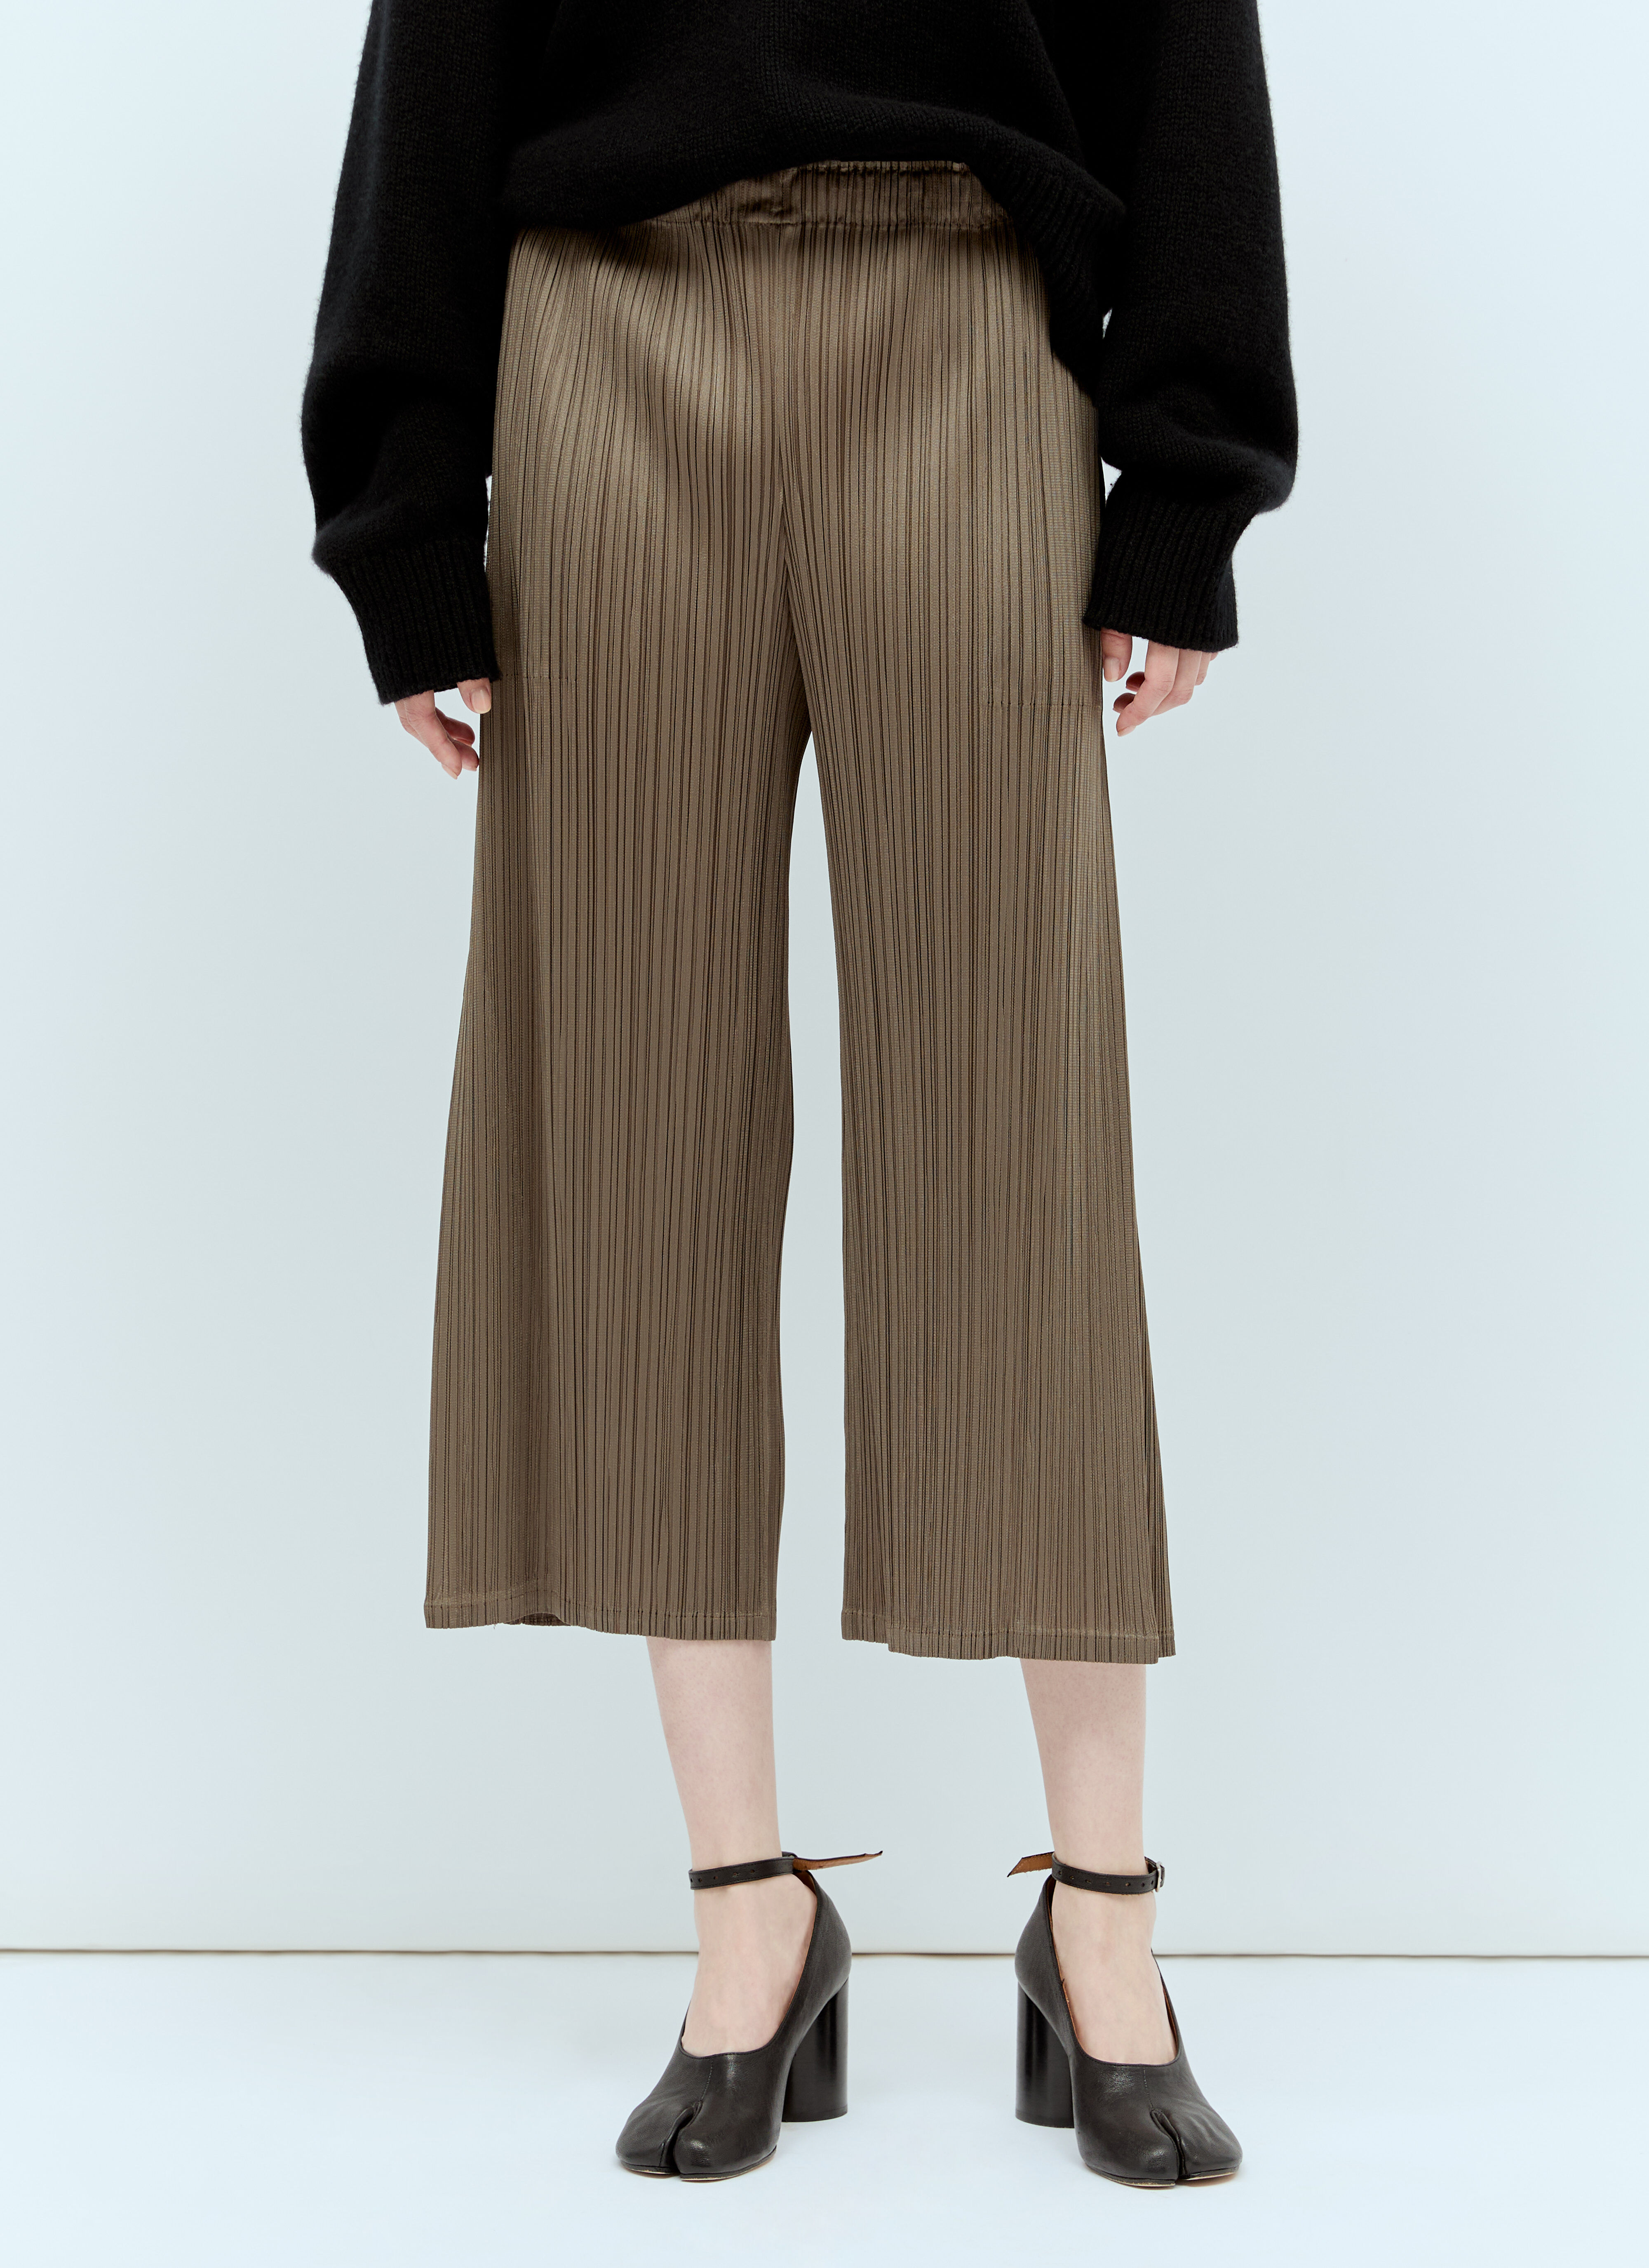 Acne Studios Monthly Colors: March Pants Beige acn0257018